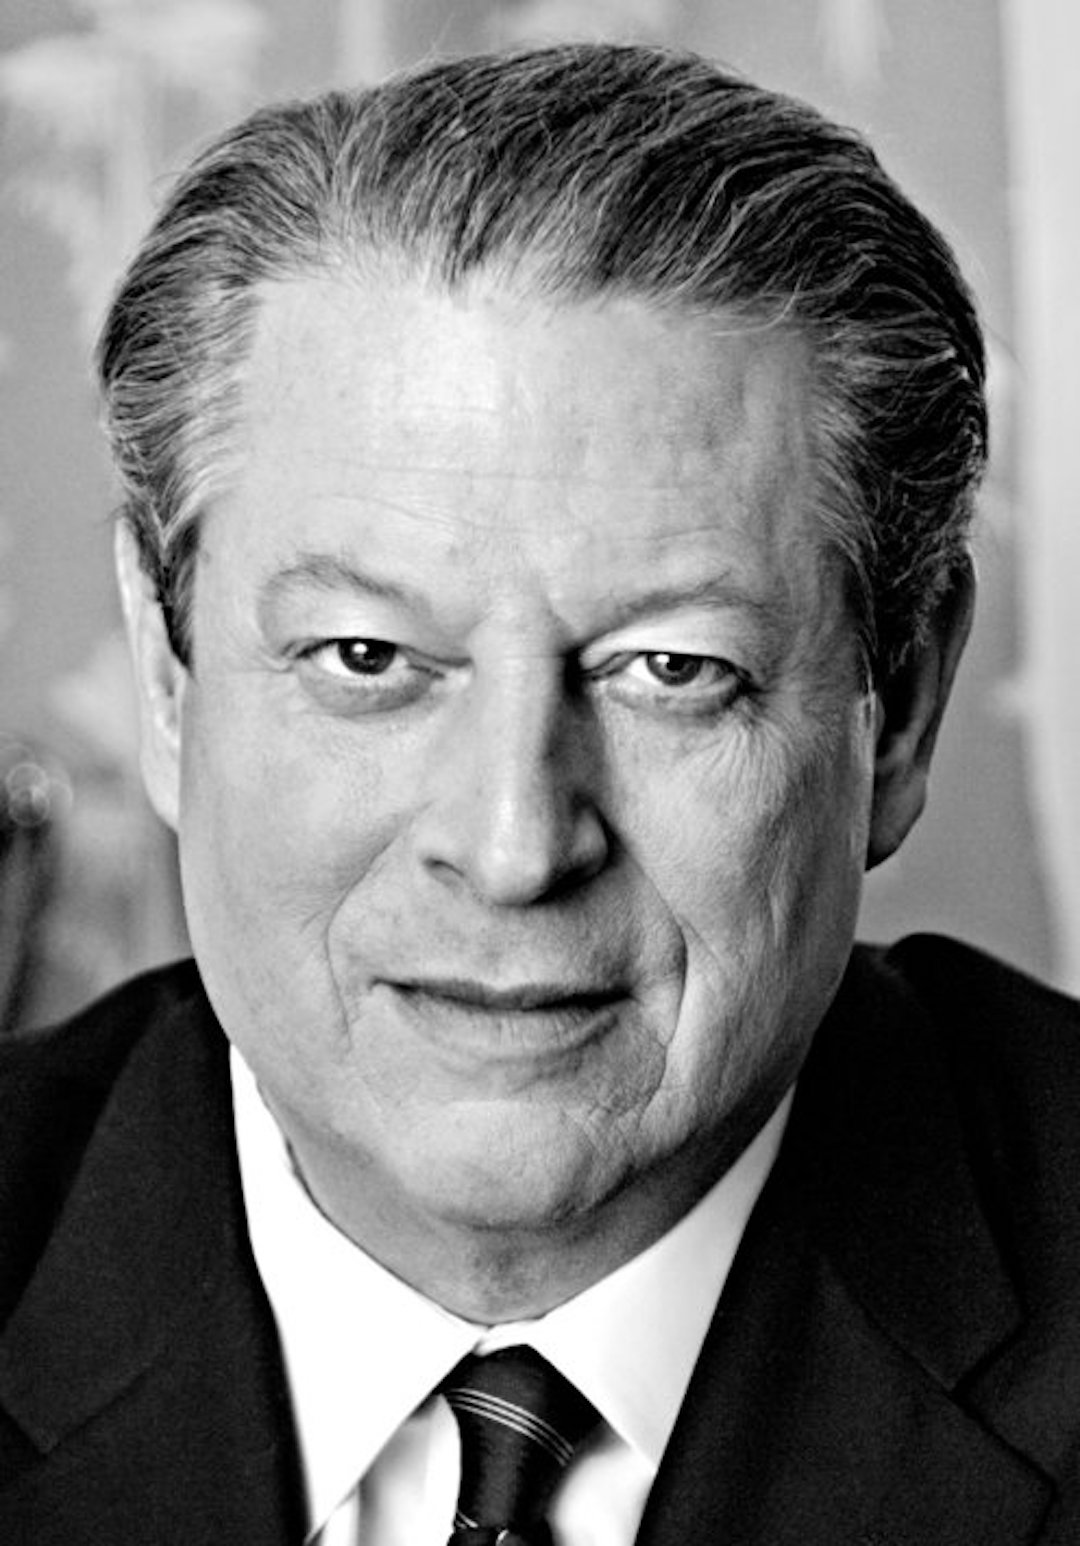 Al Gore - Former Vice President of the United States, globalist, major climate change alarmist, and Chairman and Co-Founder (with former Goldman Sachs Managing Director and close friend David W. Blood) of the green technology investment company 'Generation Investment Group', which pays him $2 million a month, by 2023 was worth $32 billion and had already netted him over $300 million from the Carbon Climate Change Con (CCCC).